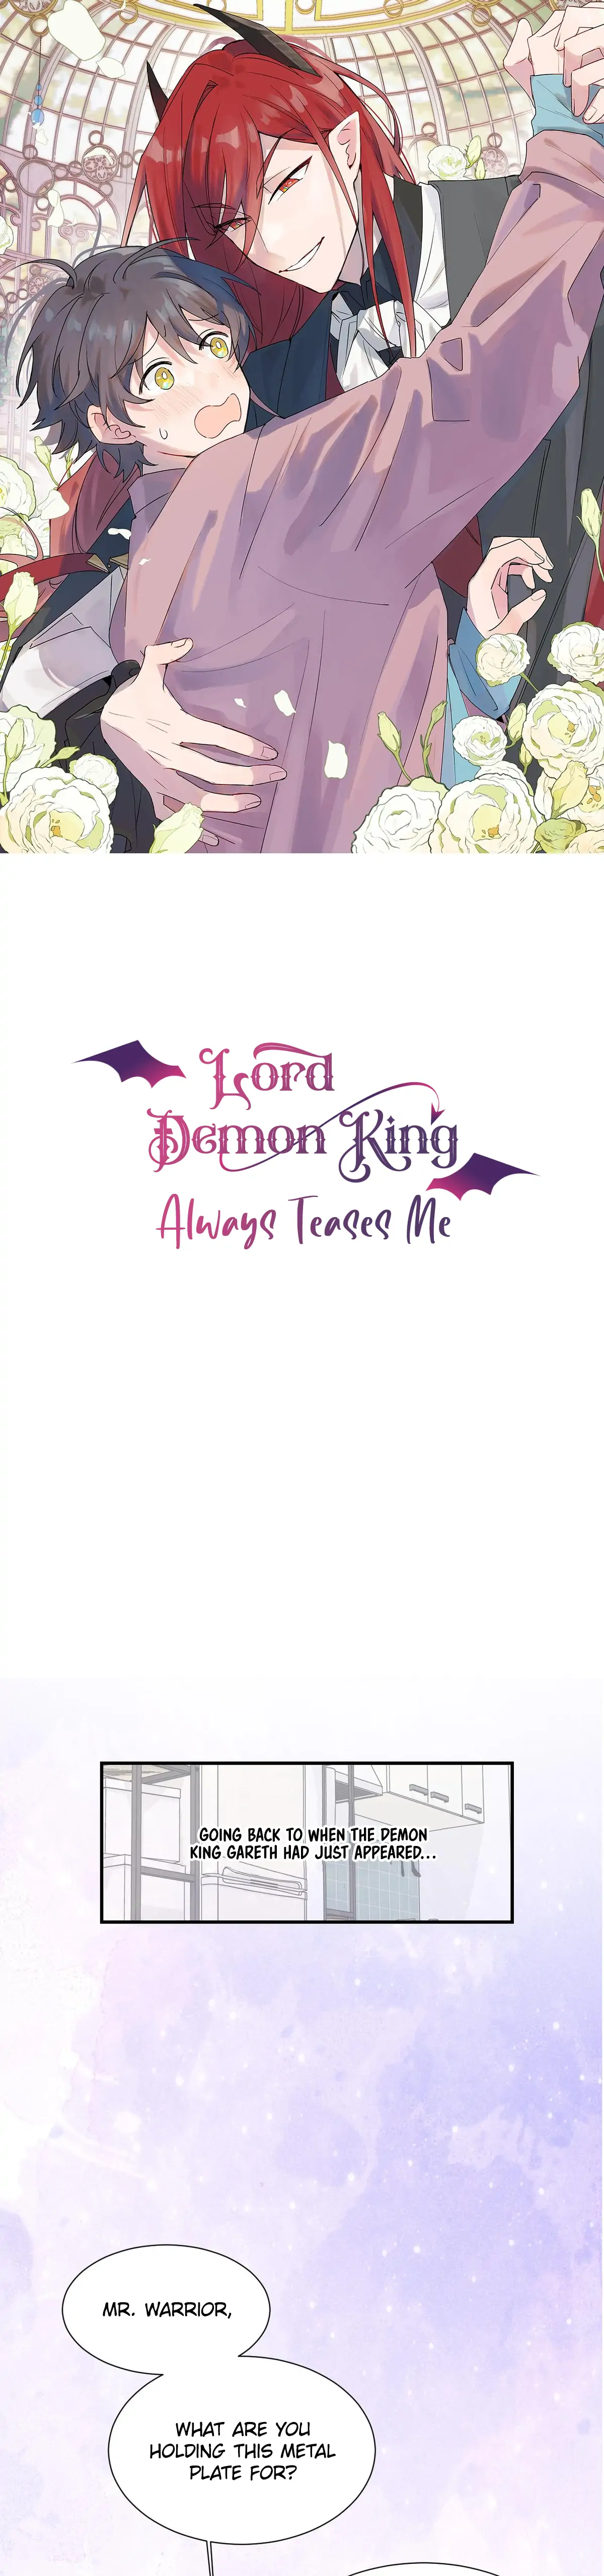 Lord Demon King Always Teases Me - chapter 23.5 - #1